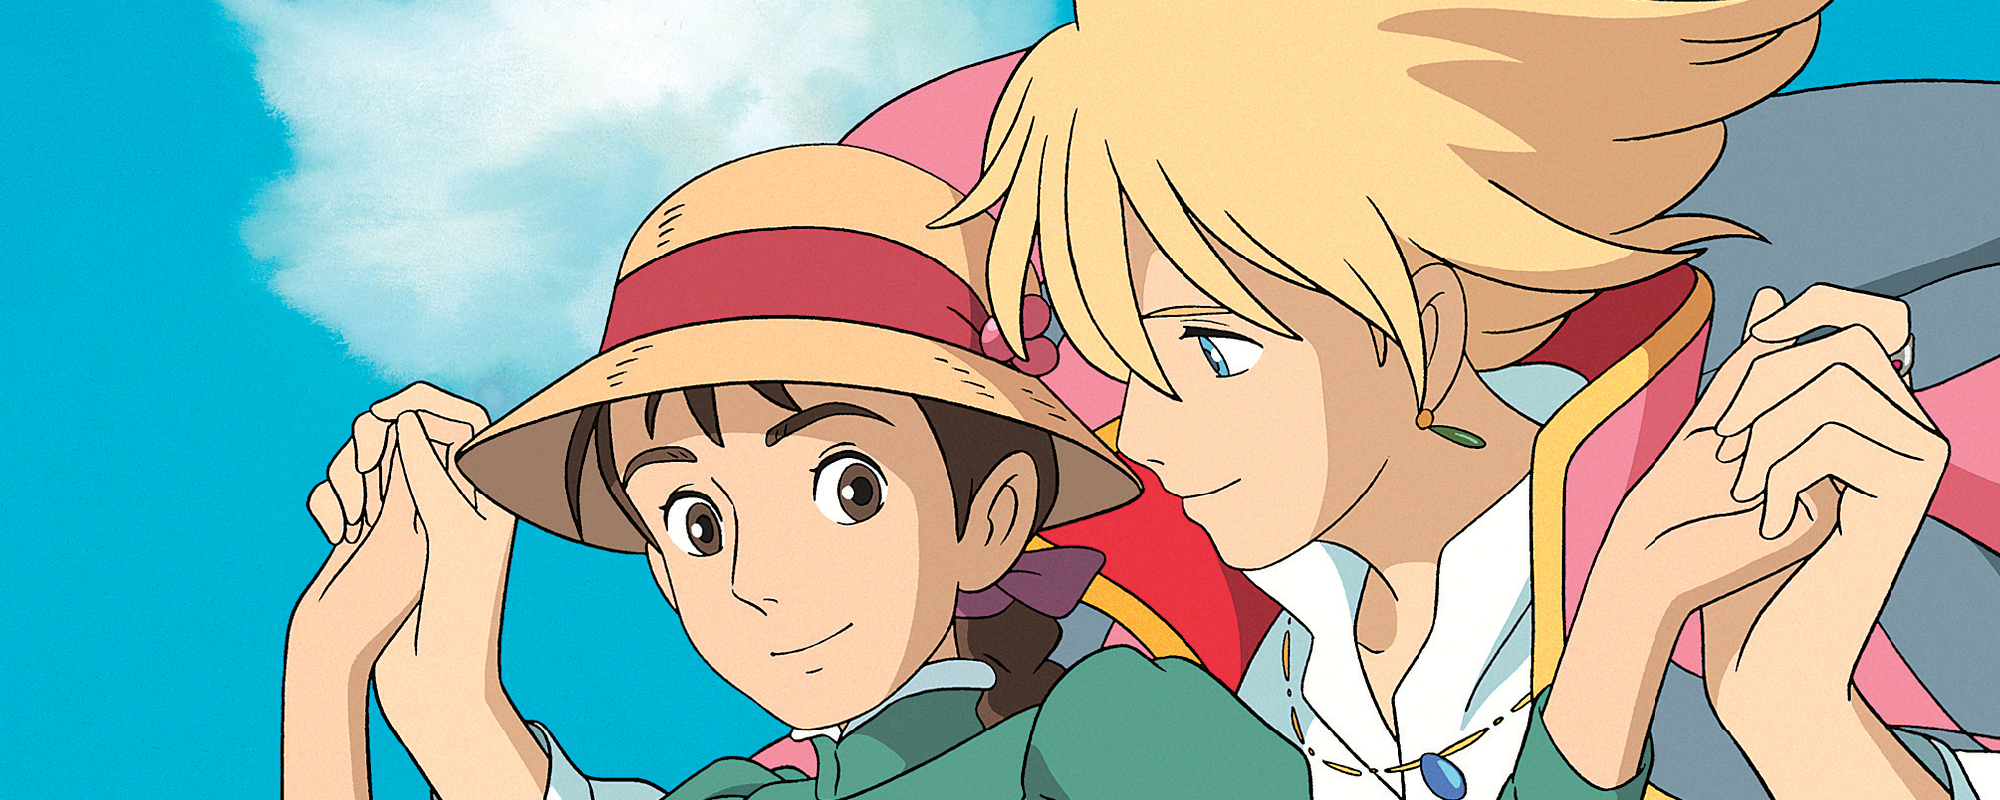 Howl's Moving Castle - Anime Honors Love, Dreams, Freedom and Happiness